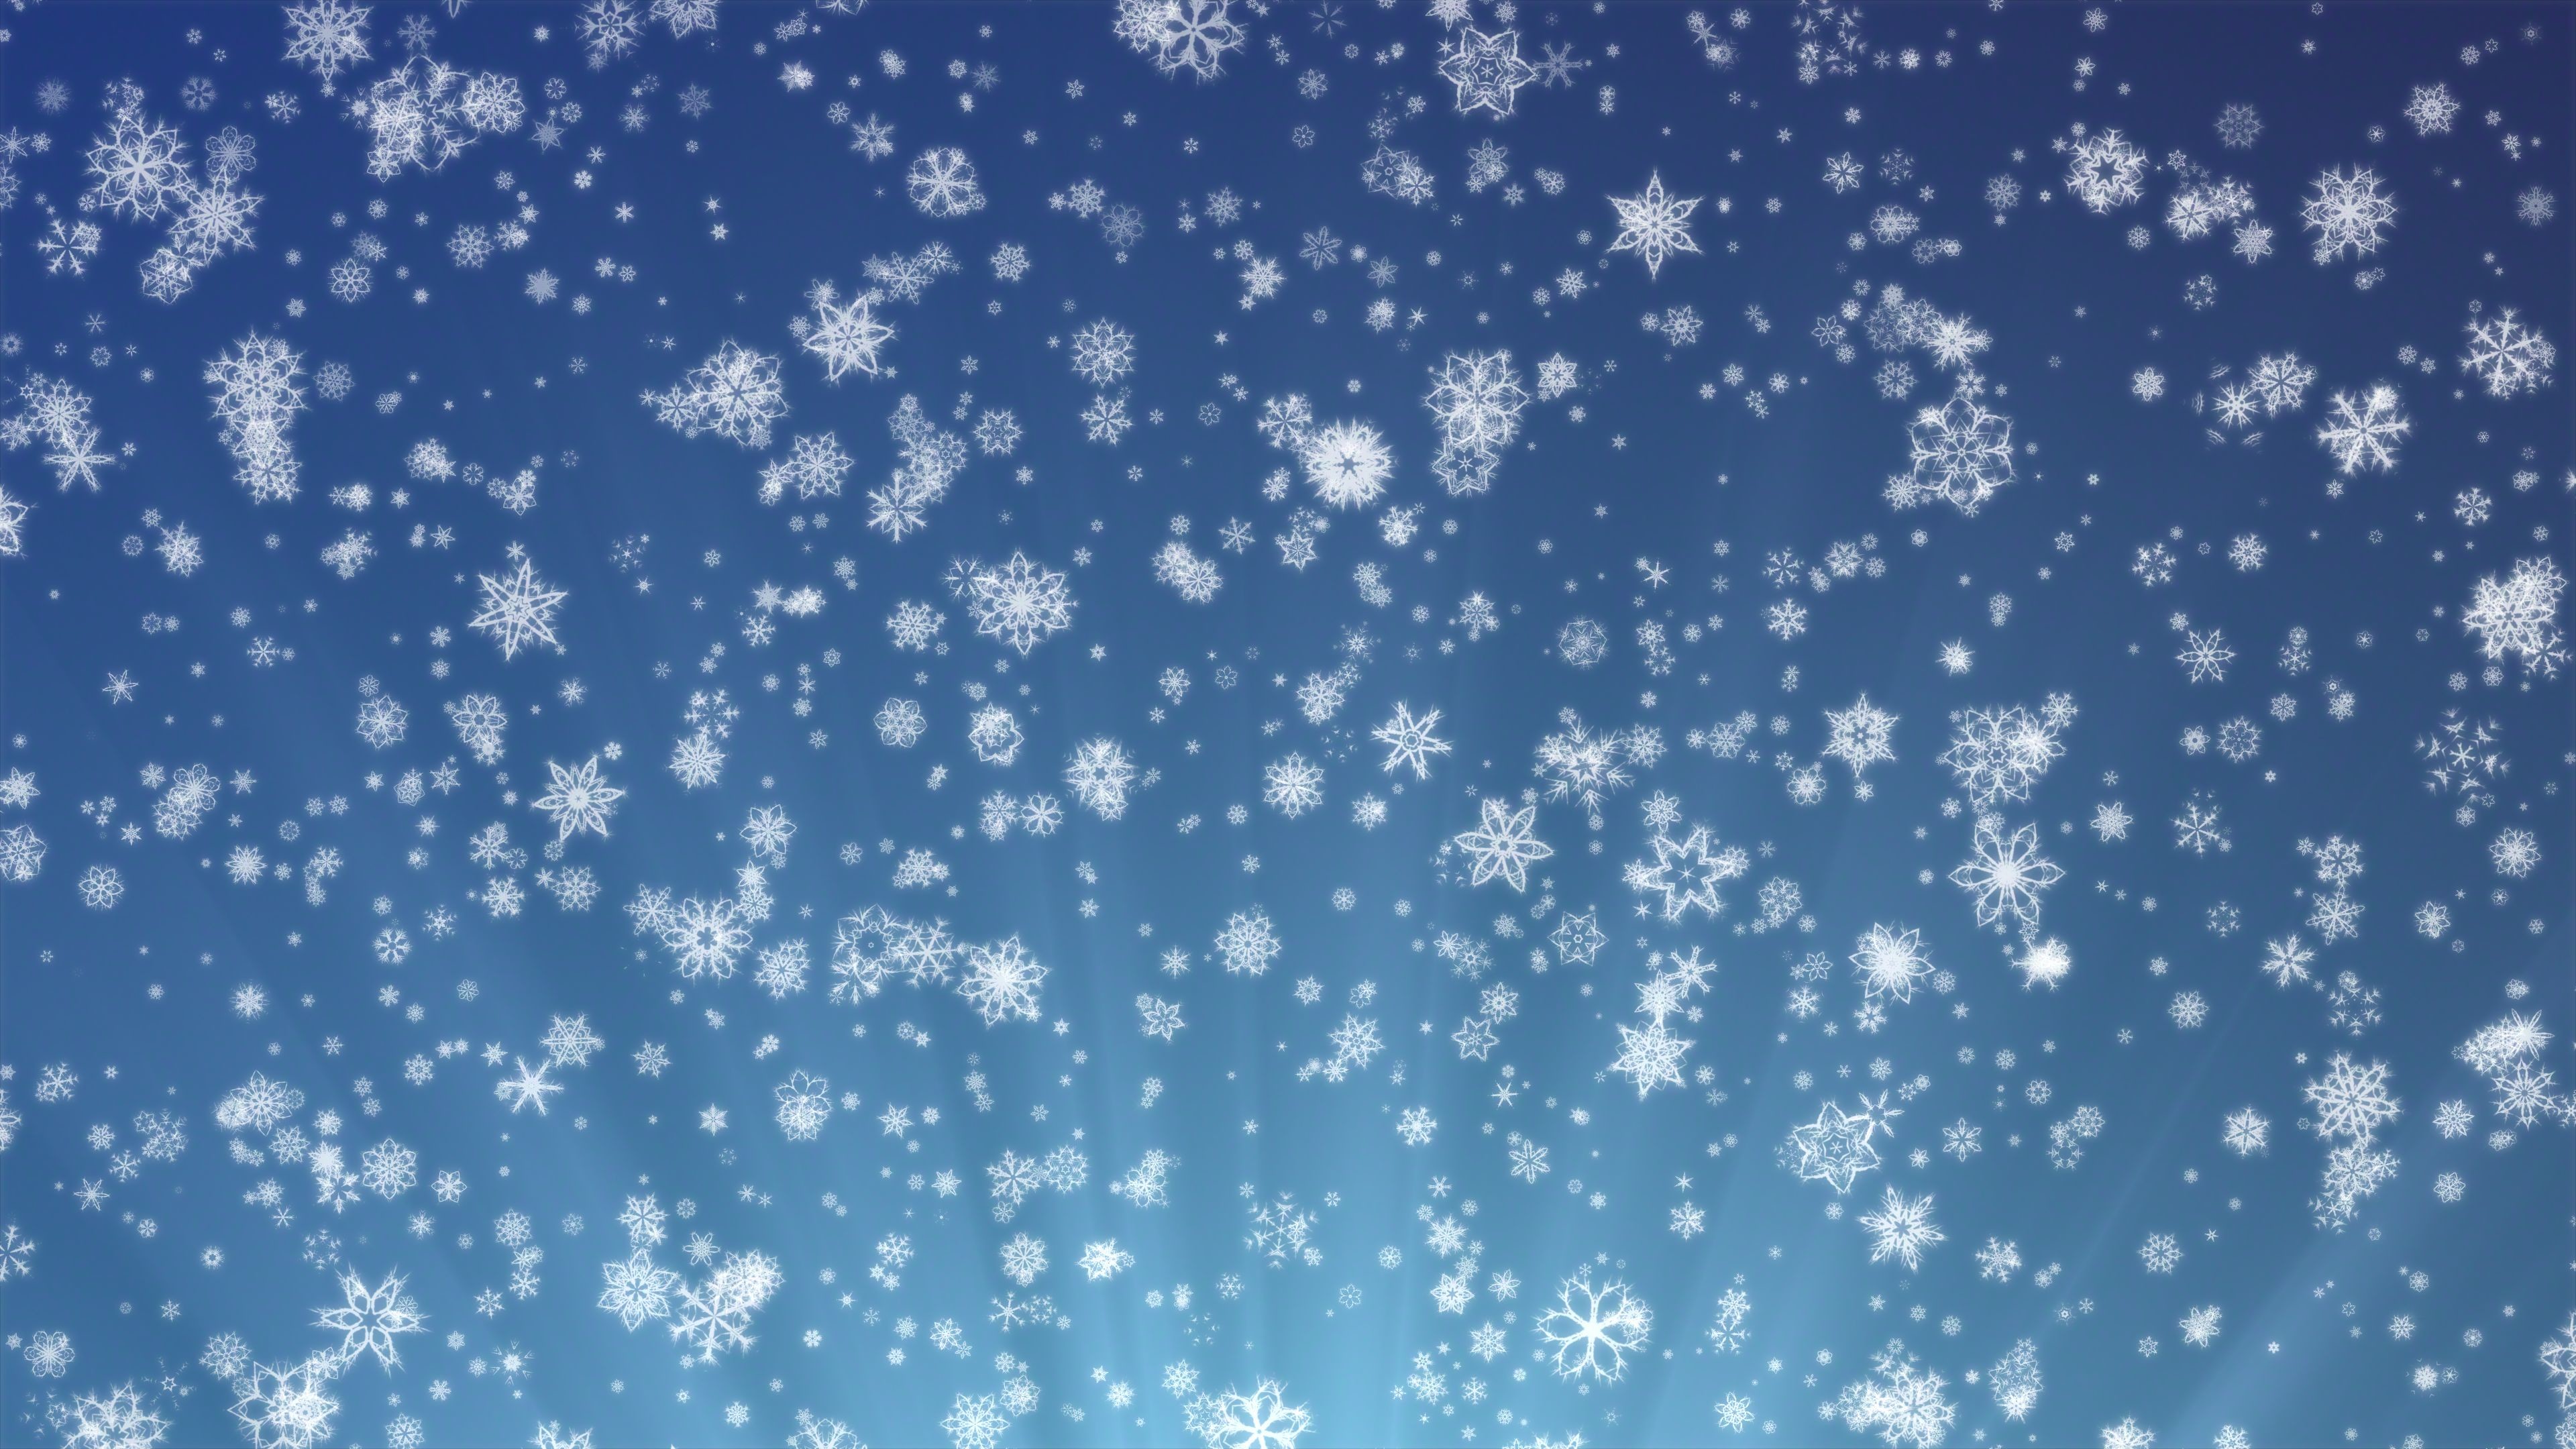 3840x2160 'Pretty Snow' - Snowflakes And Christmas Motion Background Loop-SampleStill